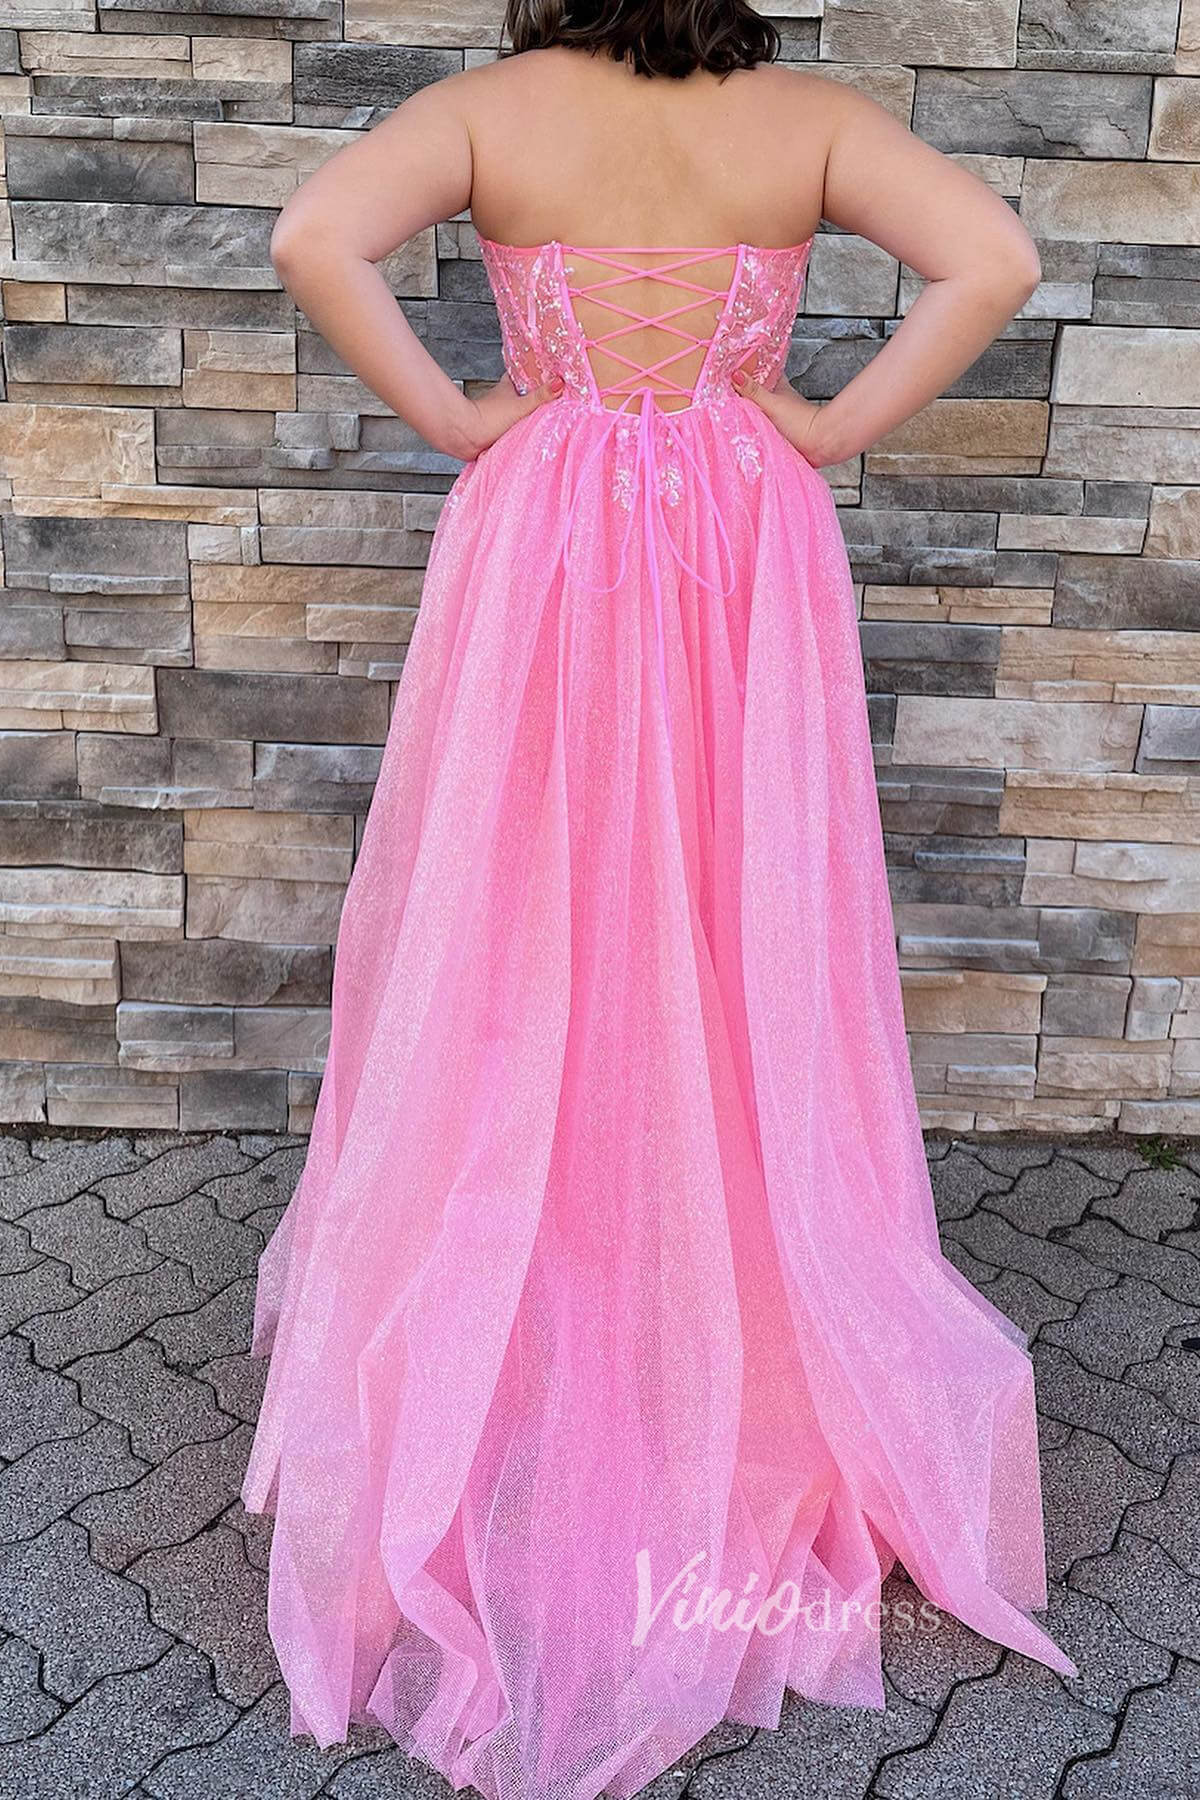 Strapless Pink Prom Dress with Beaded Lace Applique Bodice and Sparkly Tulle Bottom FD3473-prom dresses-Viniodress-Viniodress